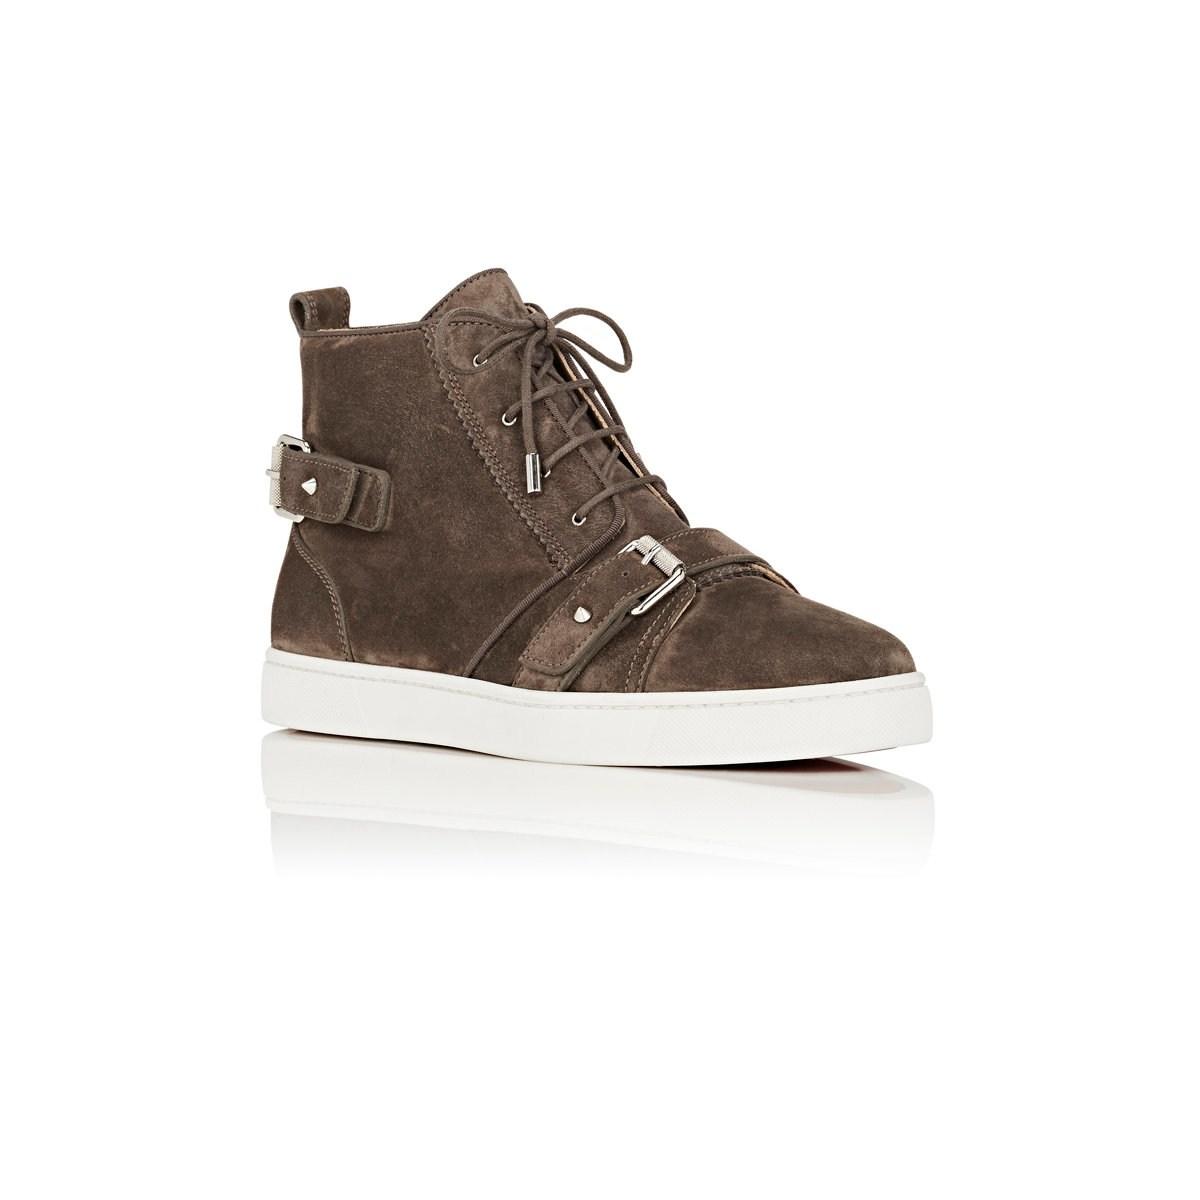 Christian Louboutin Nono Strap Suede Sneakers in Grey (Gray) for Men - Lyst